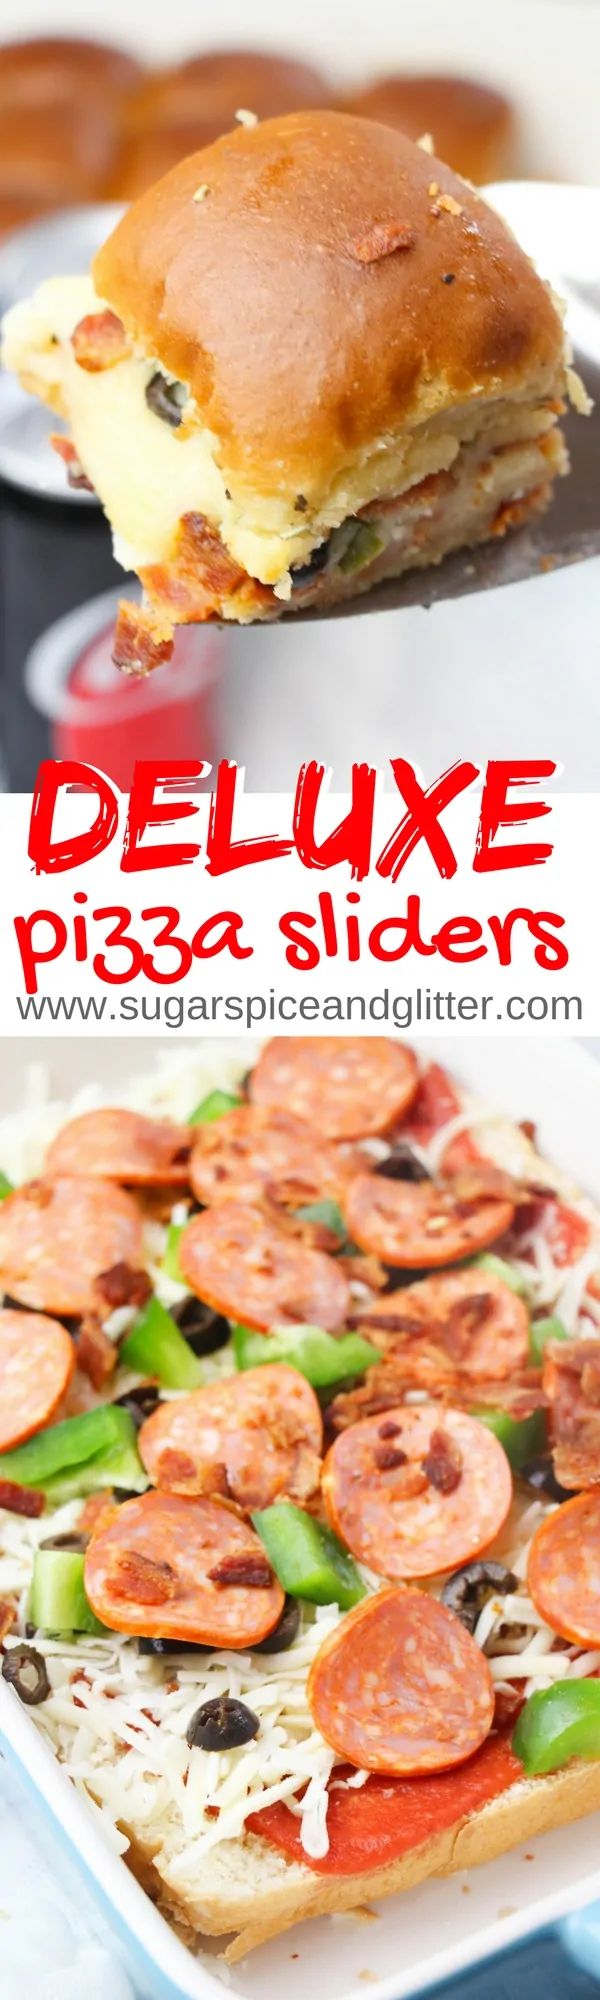 These Deluxe Pizza Sliders come together in less than 5 minutes prep time. Buttery, cheesy and with a little bit of kick - these are the perfect appetizer for a picky crowd